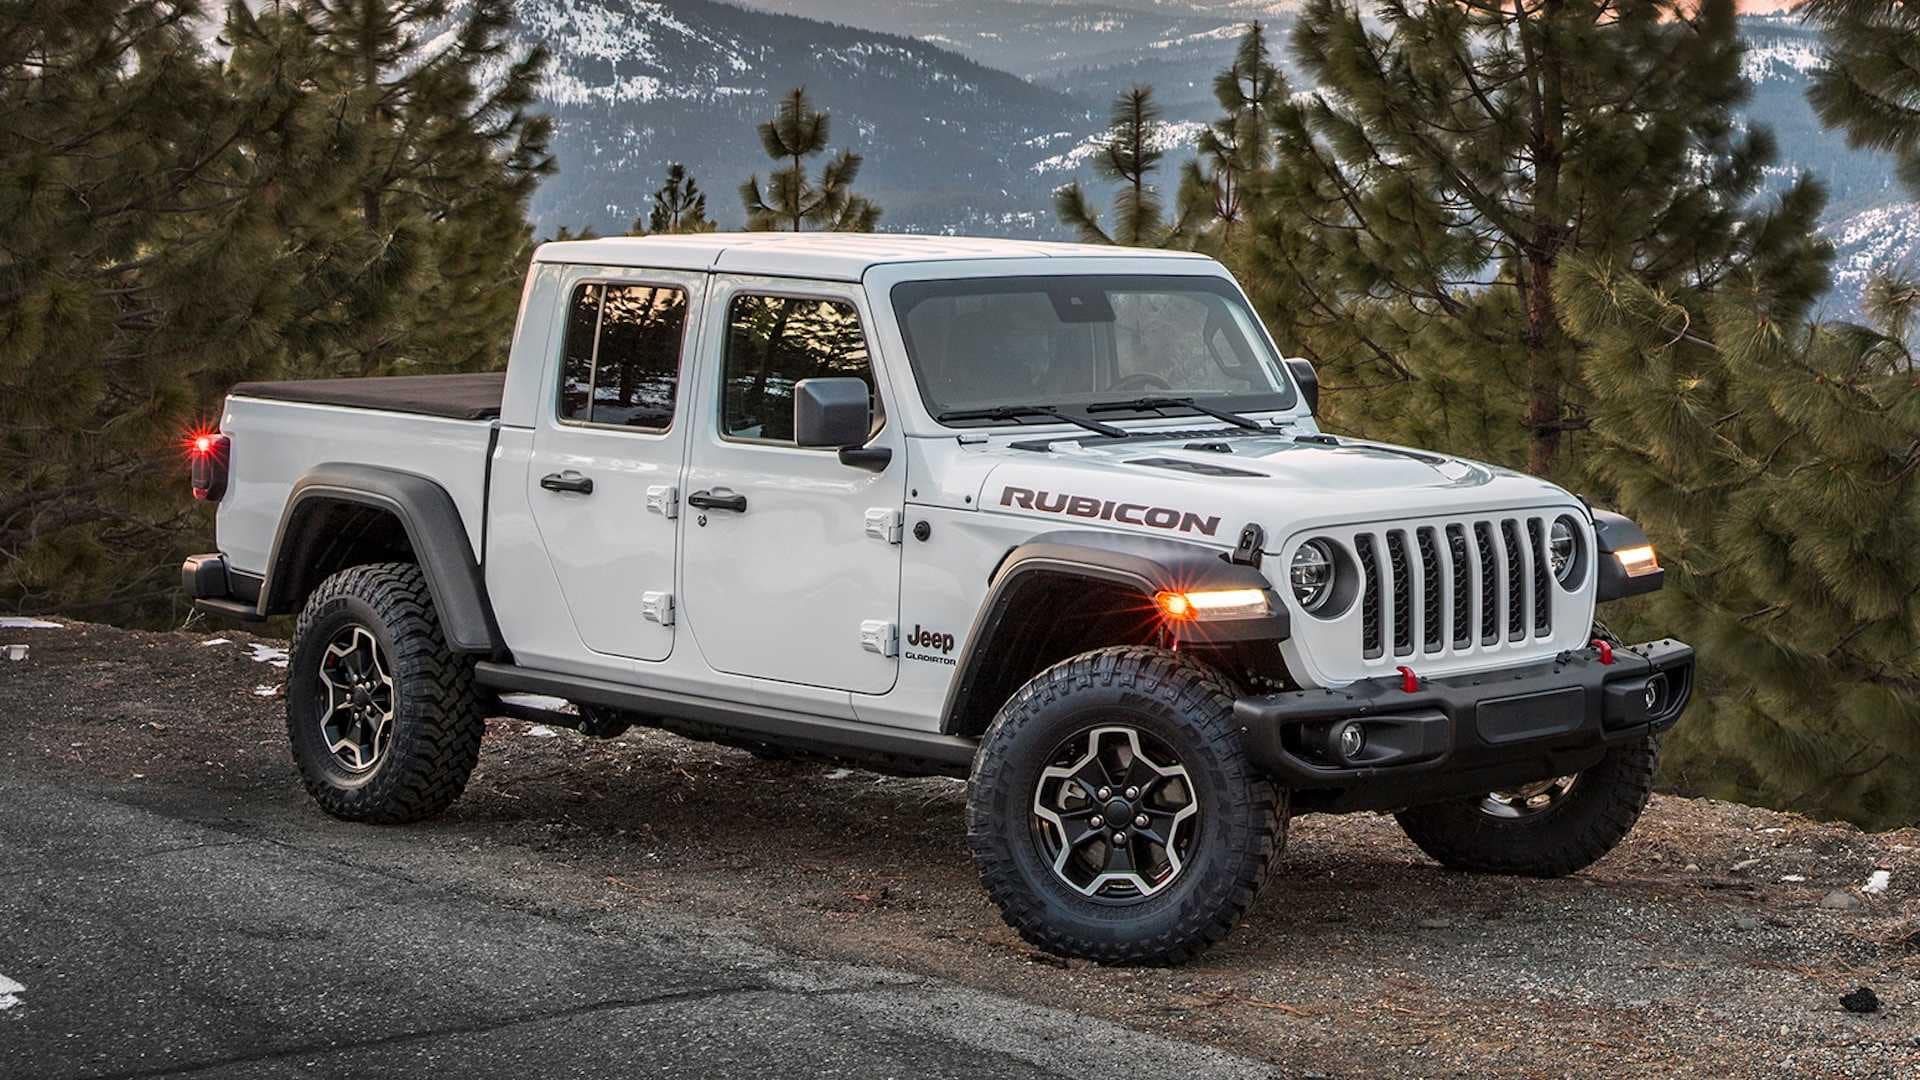 The Versatility And Power Of The 2020 Jeep Gladiator | Justjeeps.com